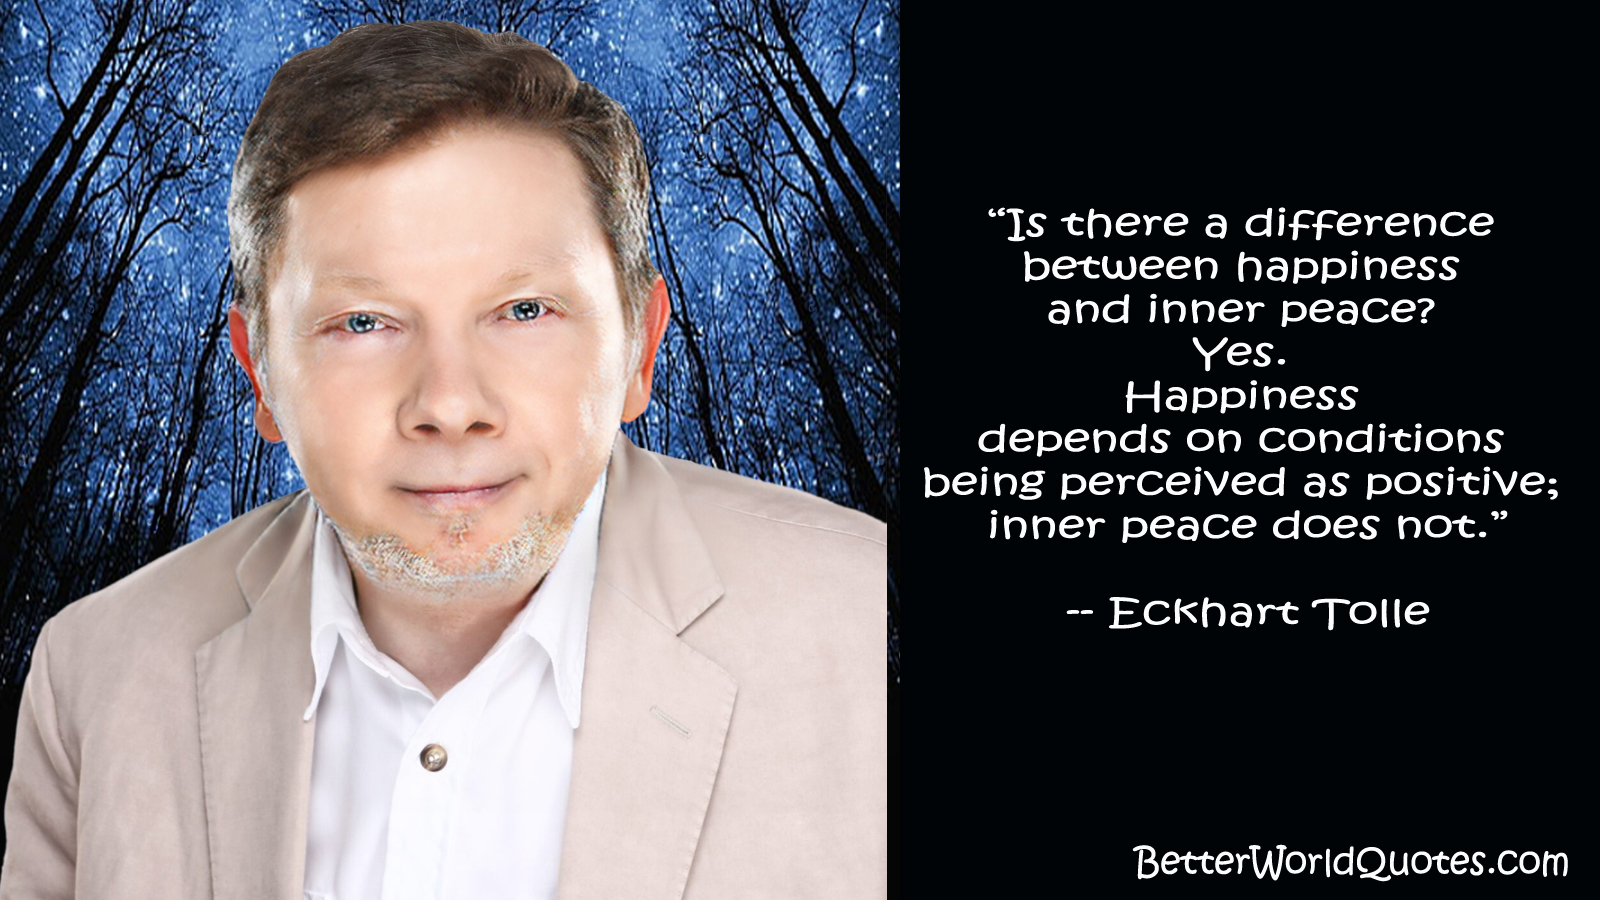 Eckhart Tolle: Is there a difference between happiness and inner peace? Yes. Happiness depends on conditions being perceived as positive; inner peace does not.
 Eckhart Tolle
